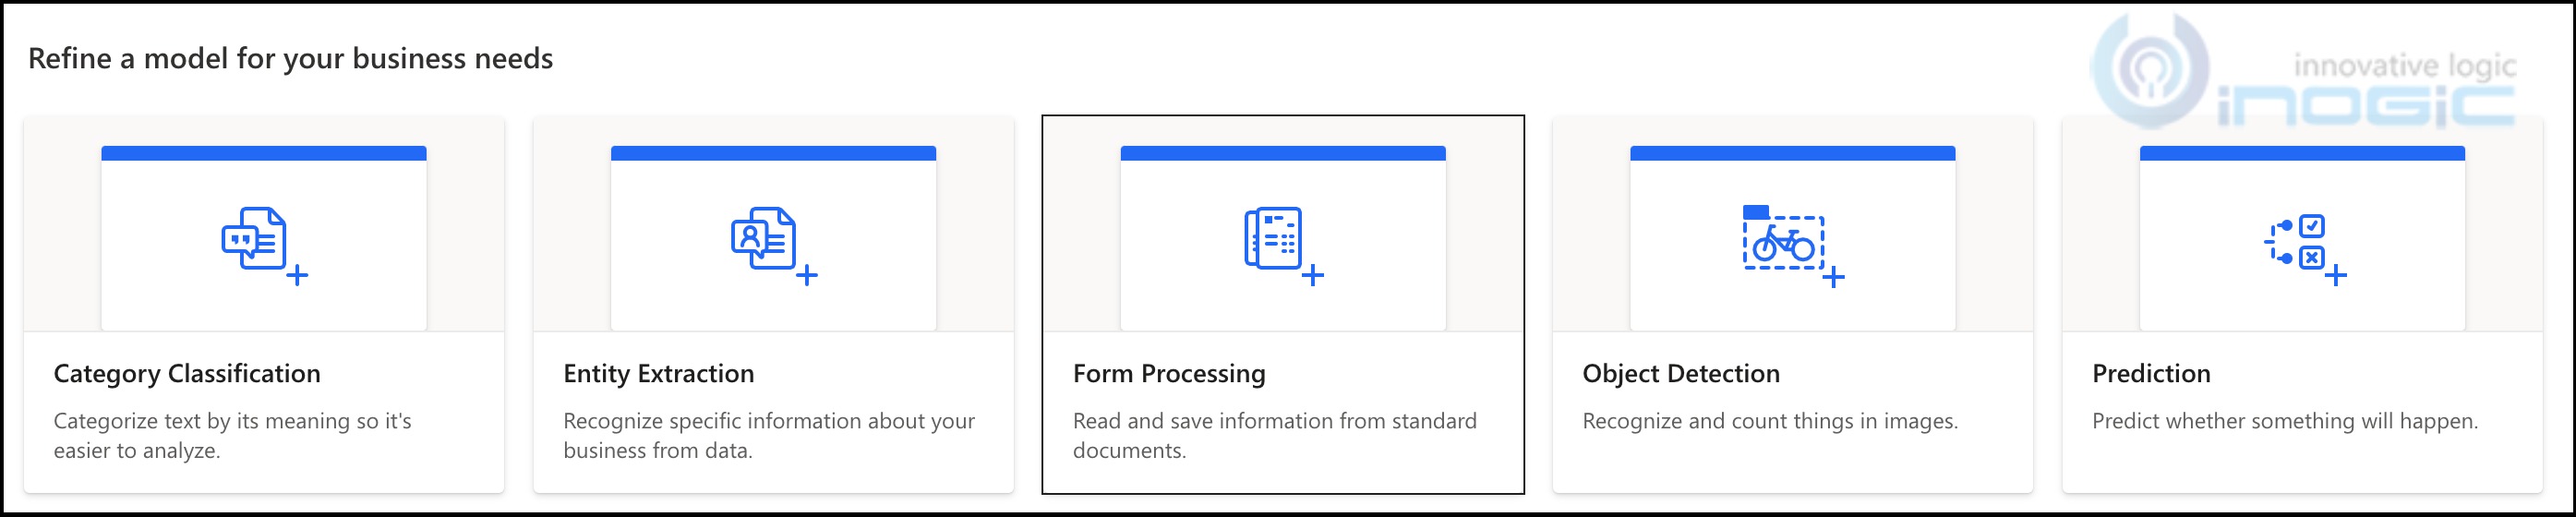 Microsoft Document Automation Application using AI Builder Form Processing Model